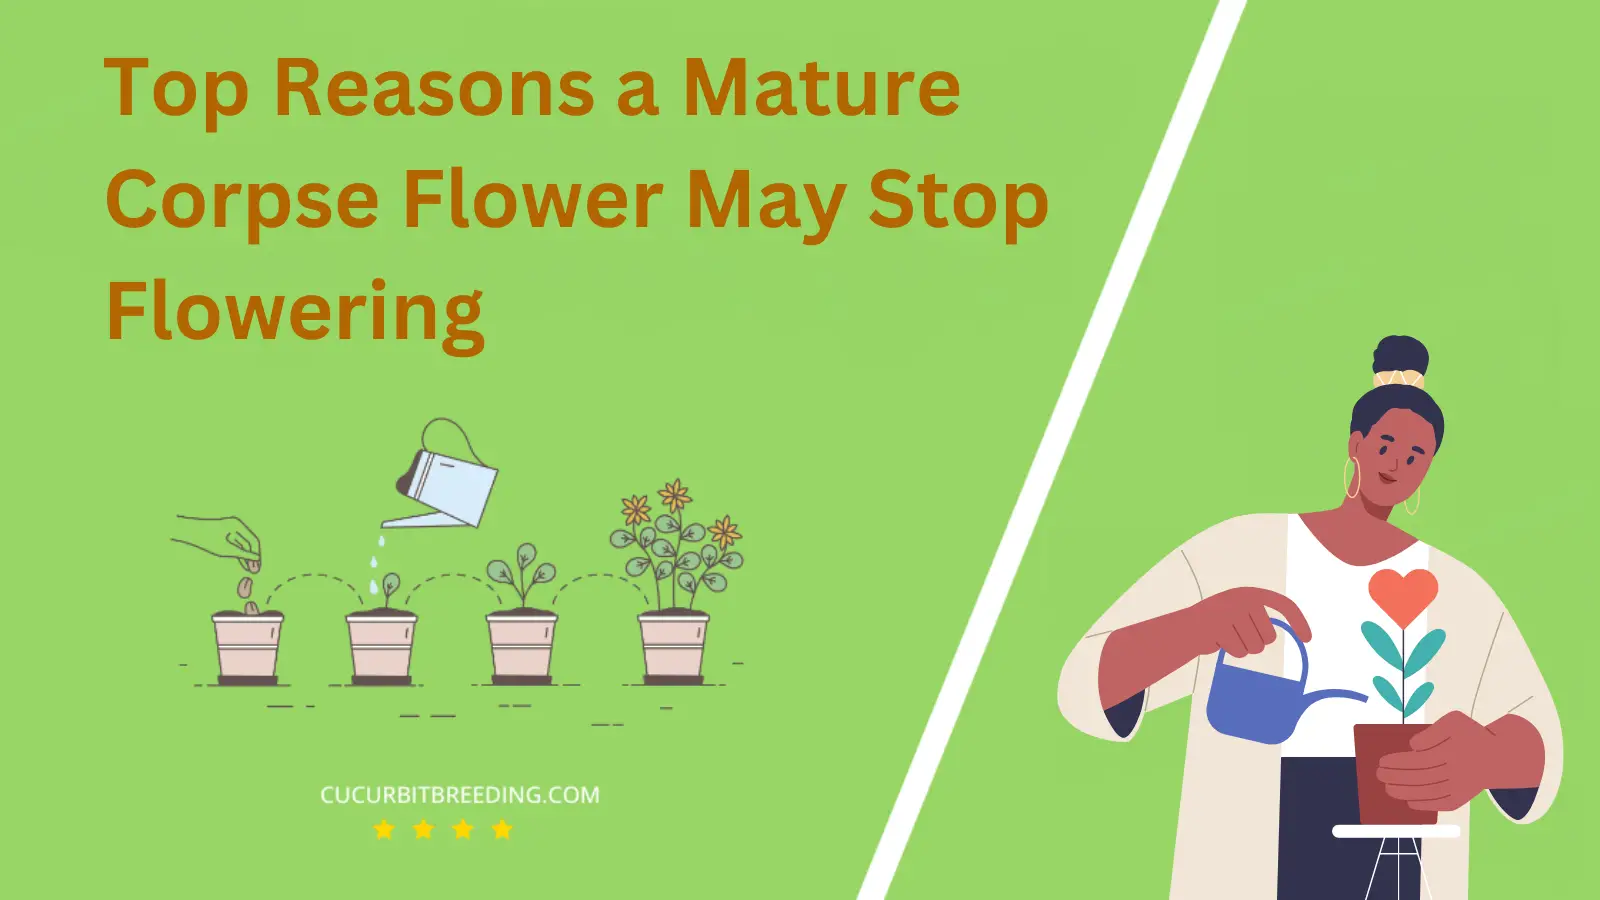 Top Reasons a Mature Corpse Flower May Stop Flowering